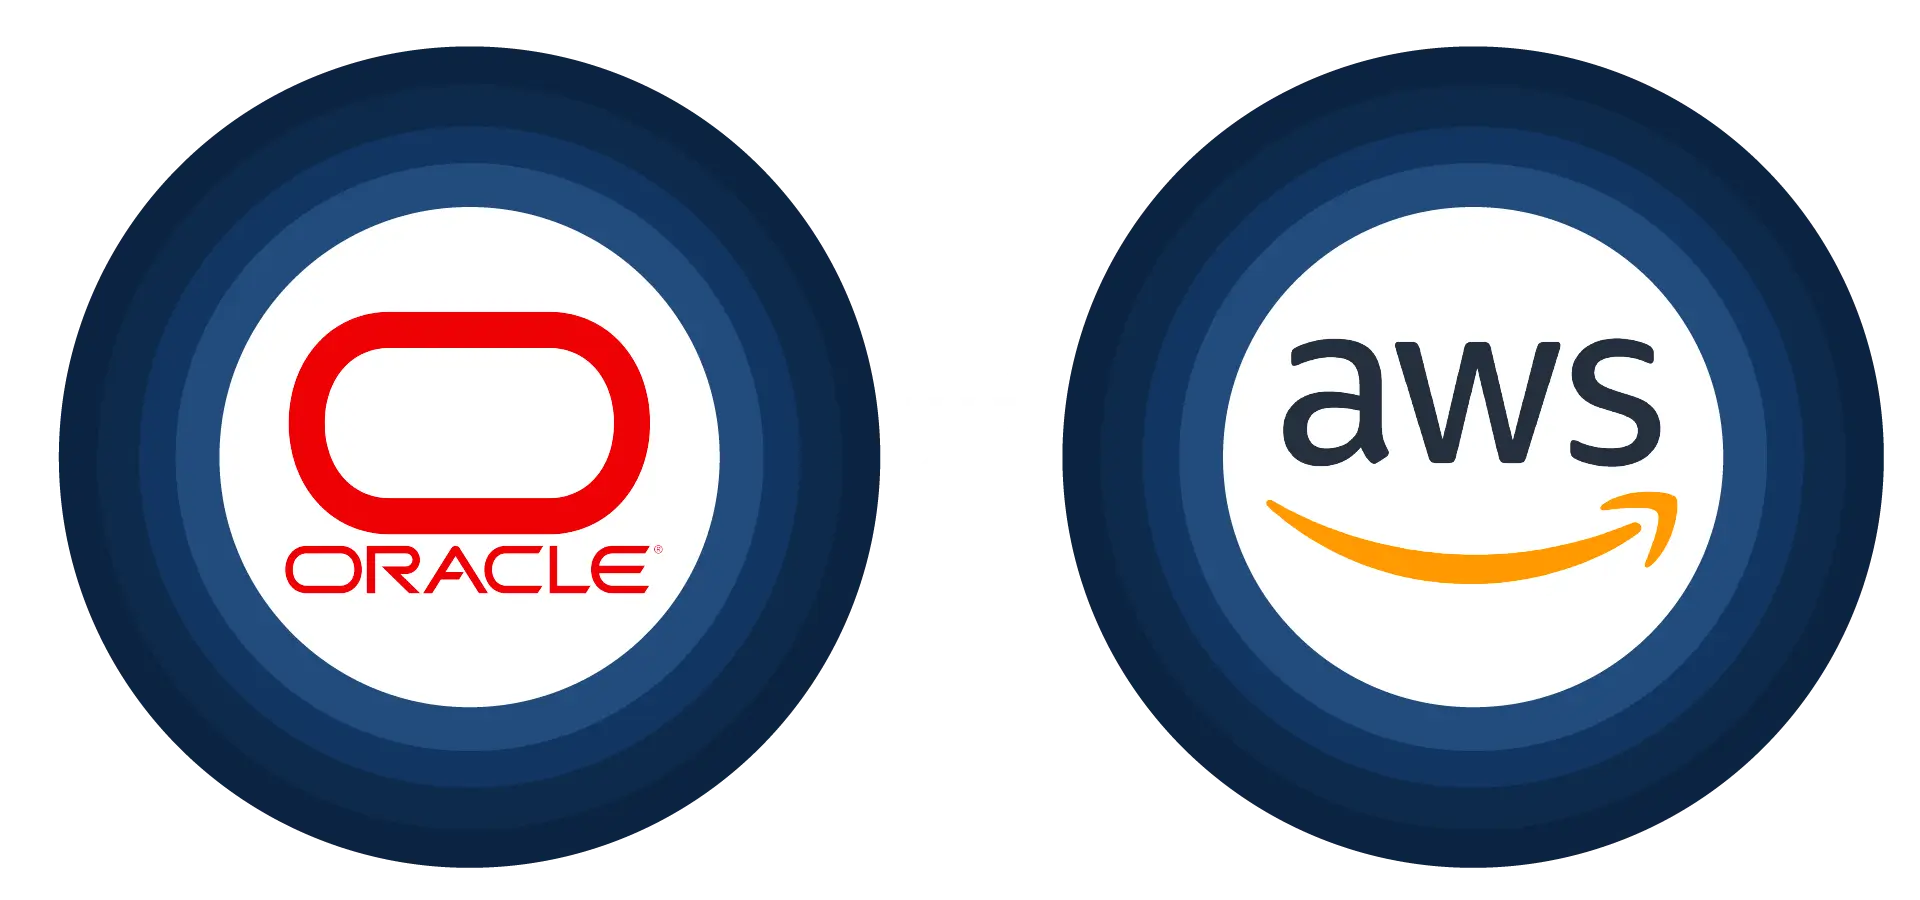 Product_Oracle-AWS_V1-01 